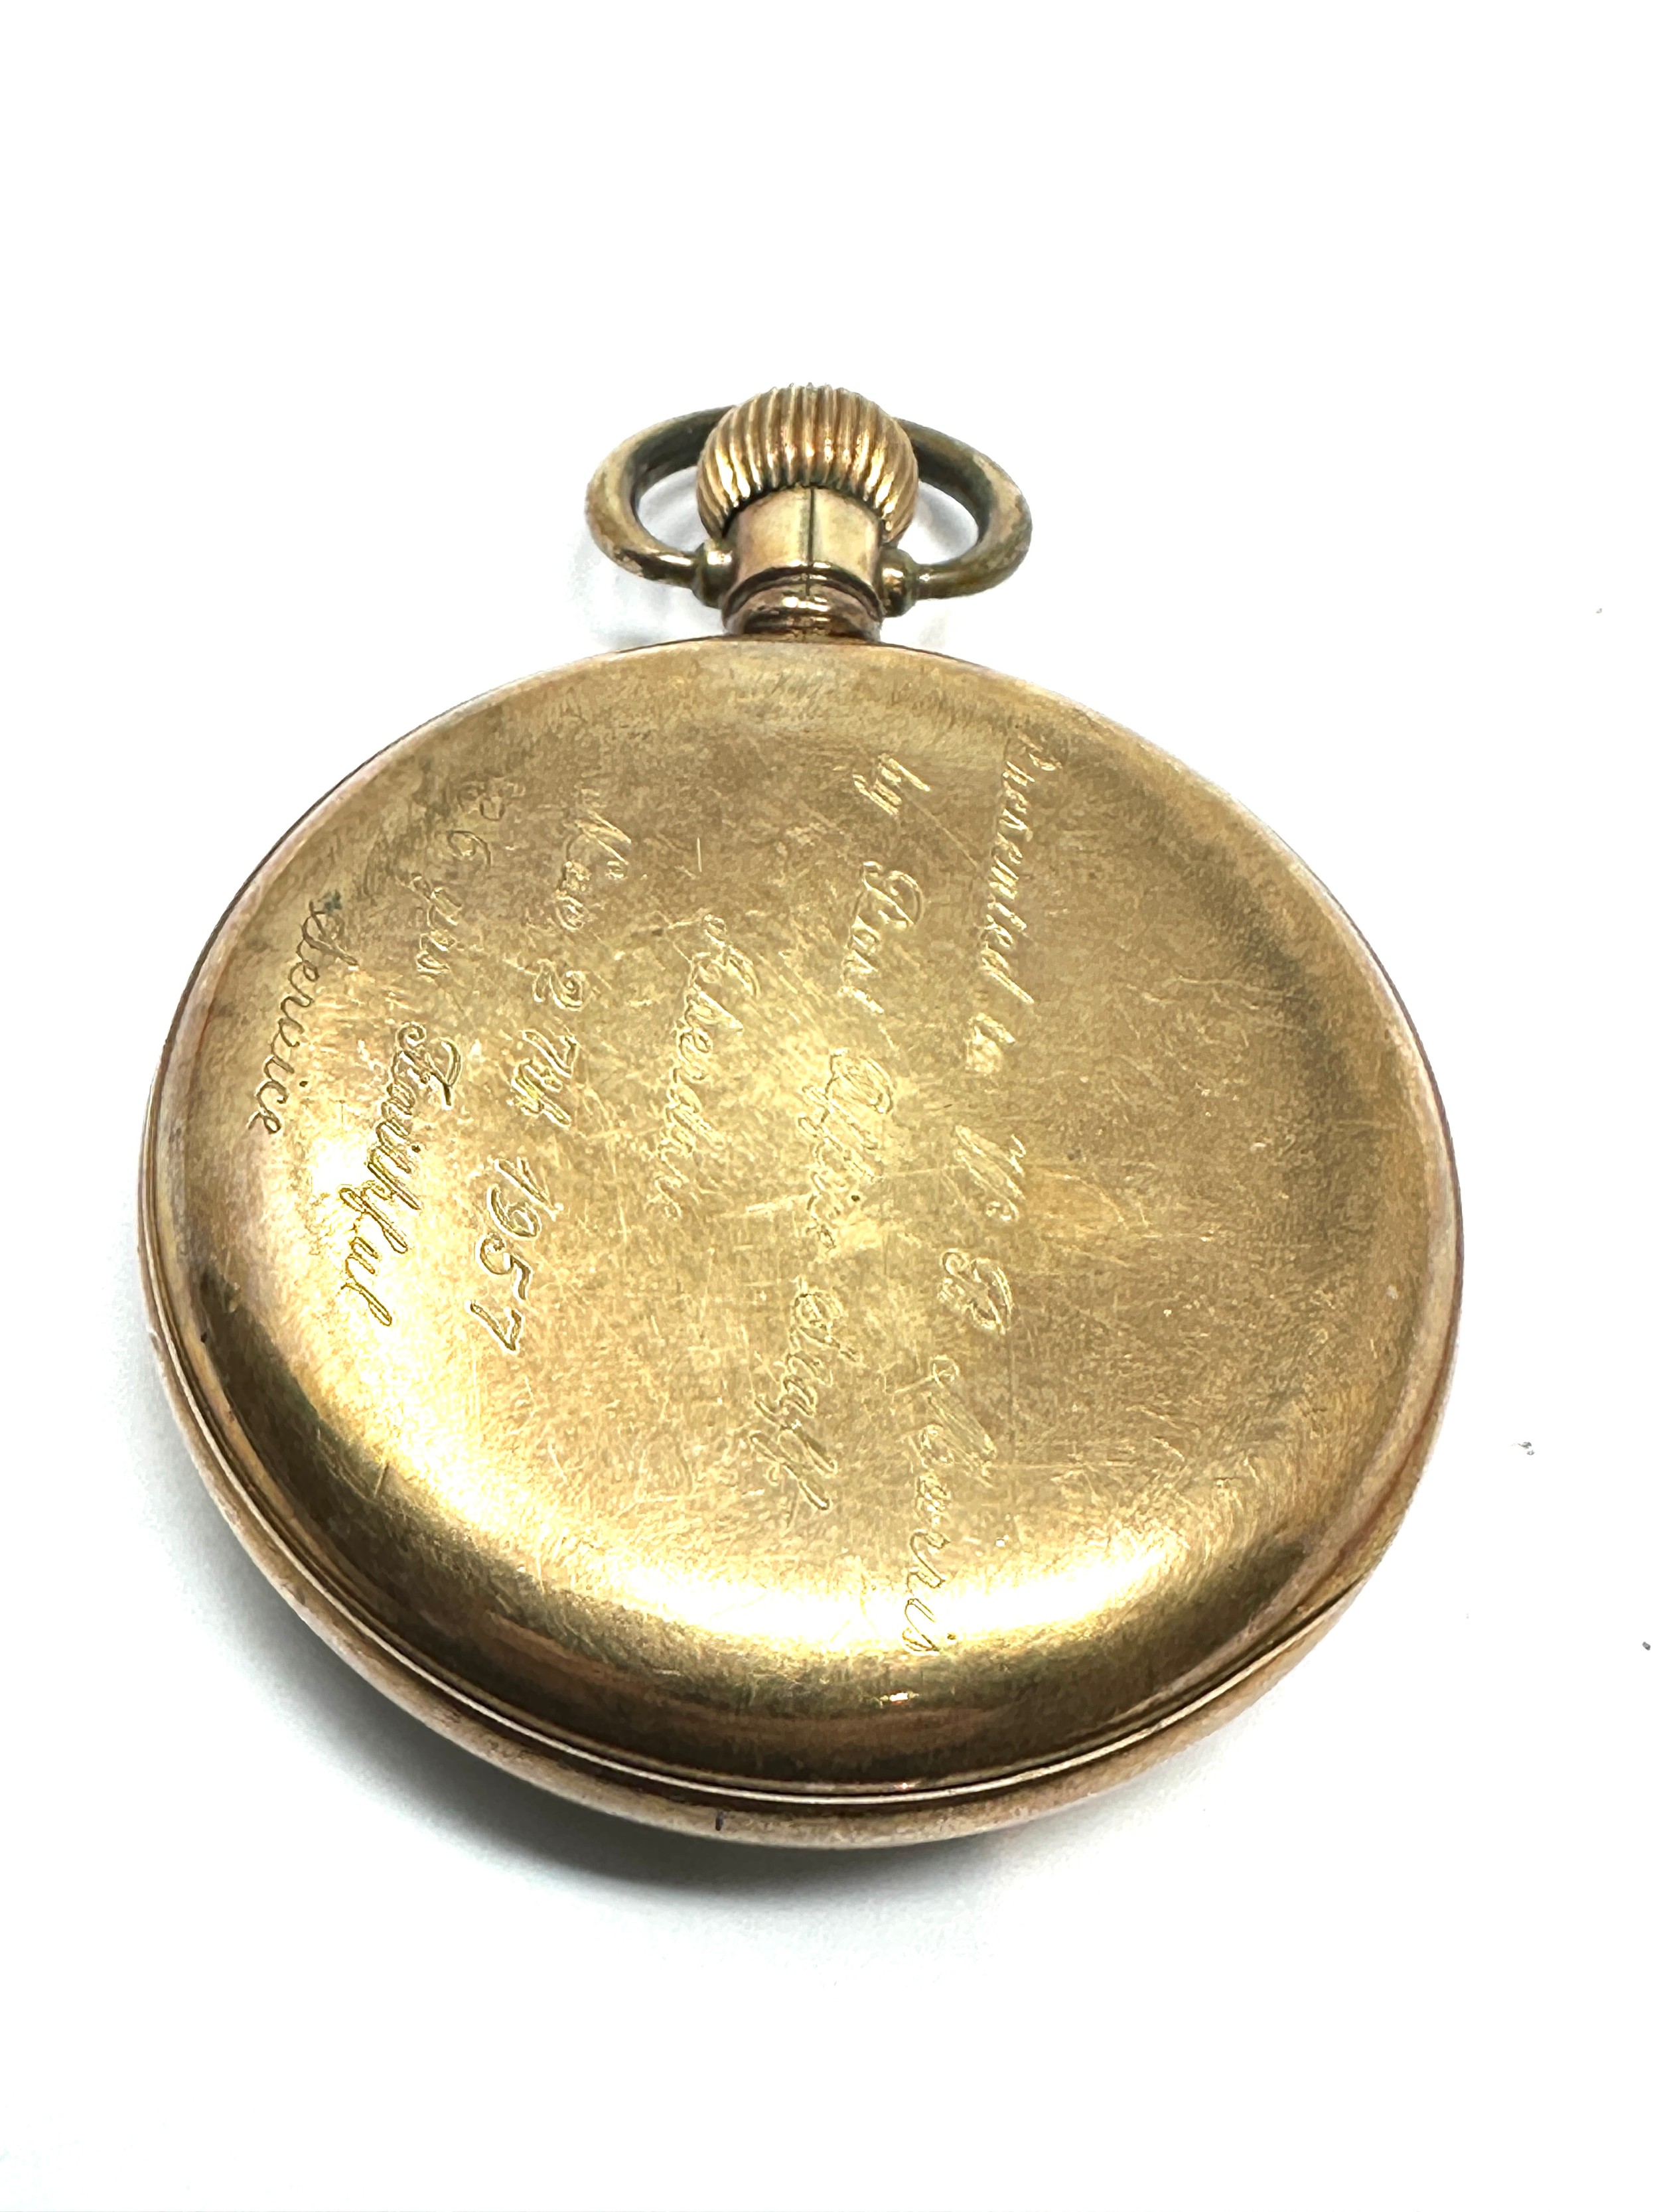 Vintage Gents Rolled Gold Open Face Pocket Watch Hand-wind Working - Image 2 of 3